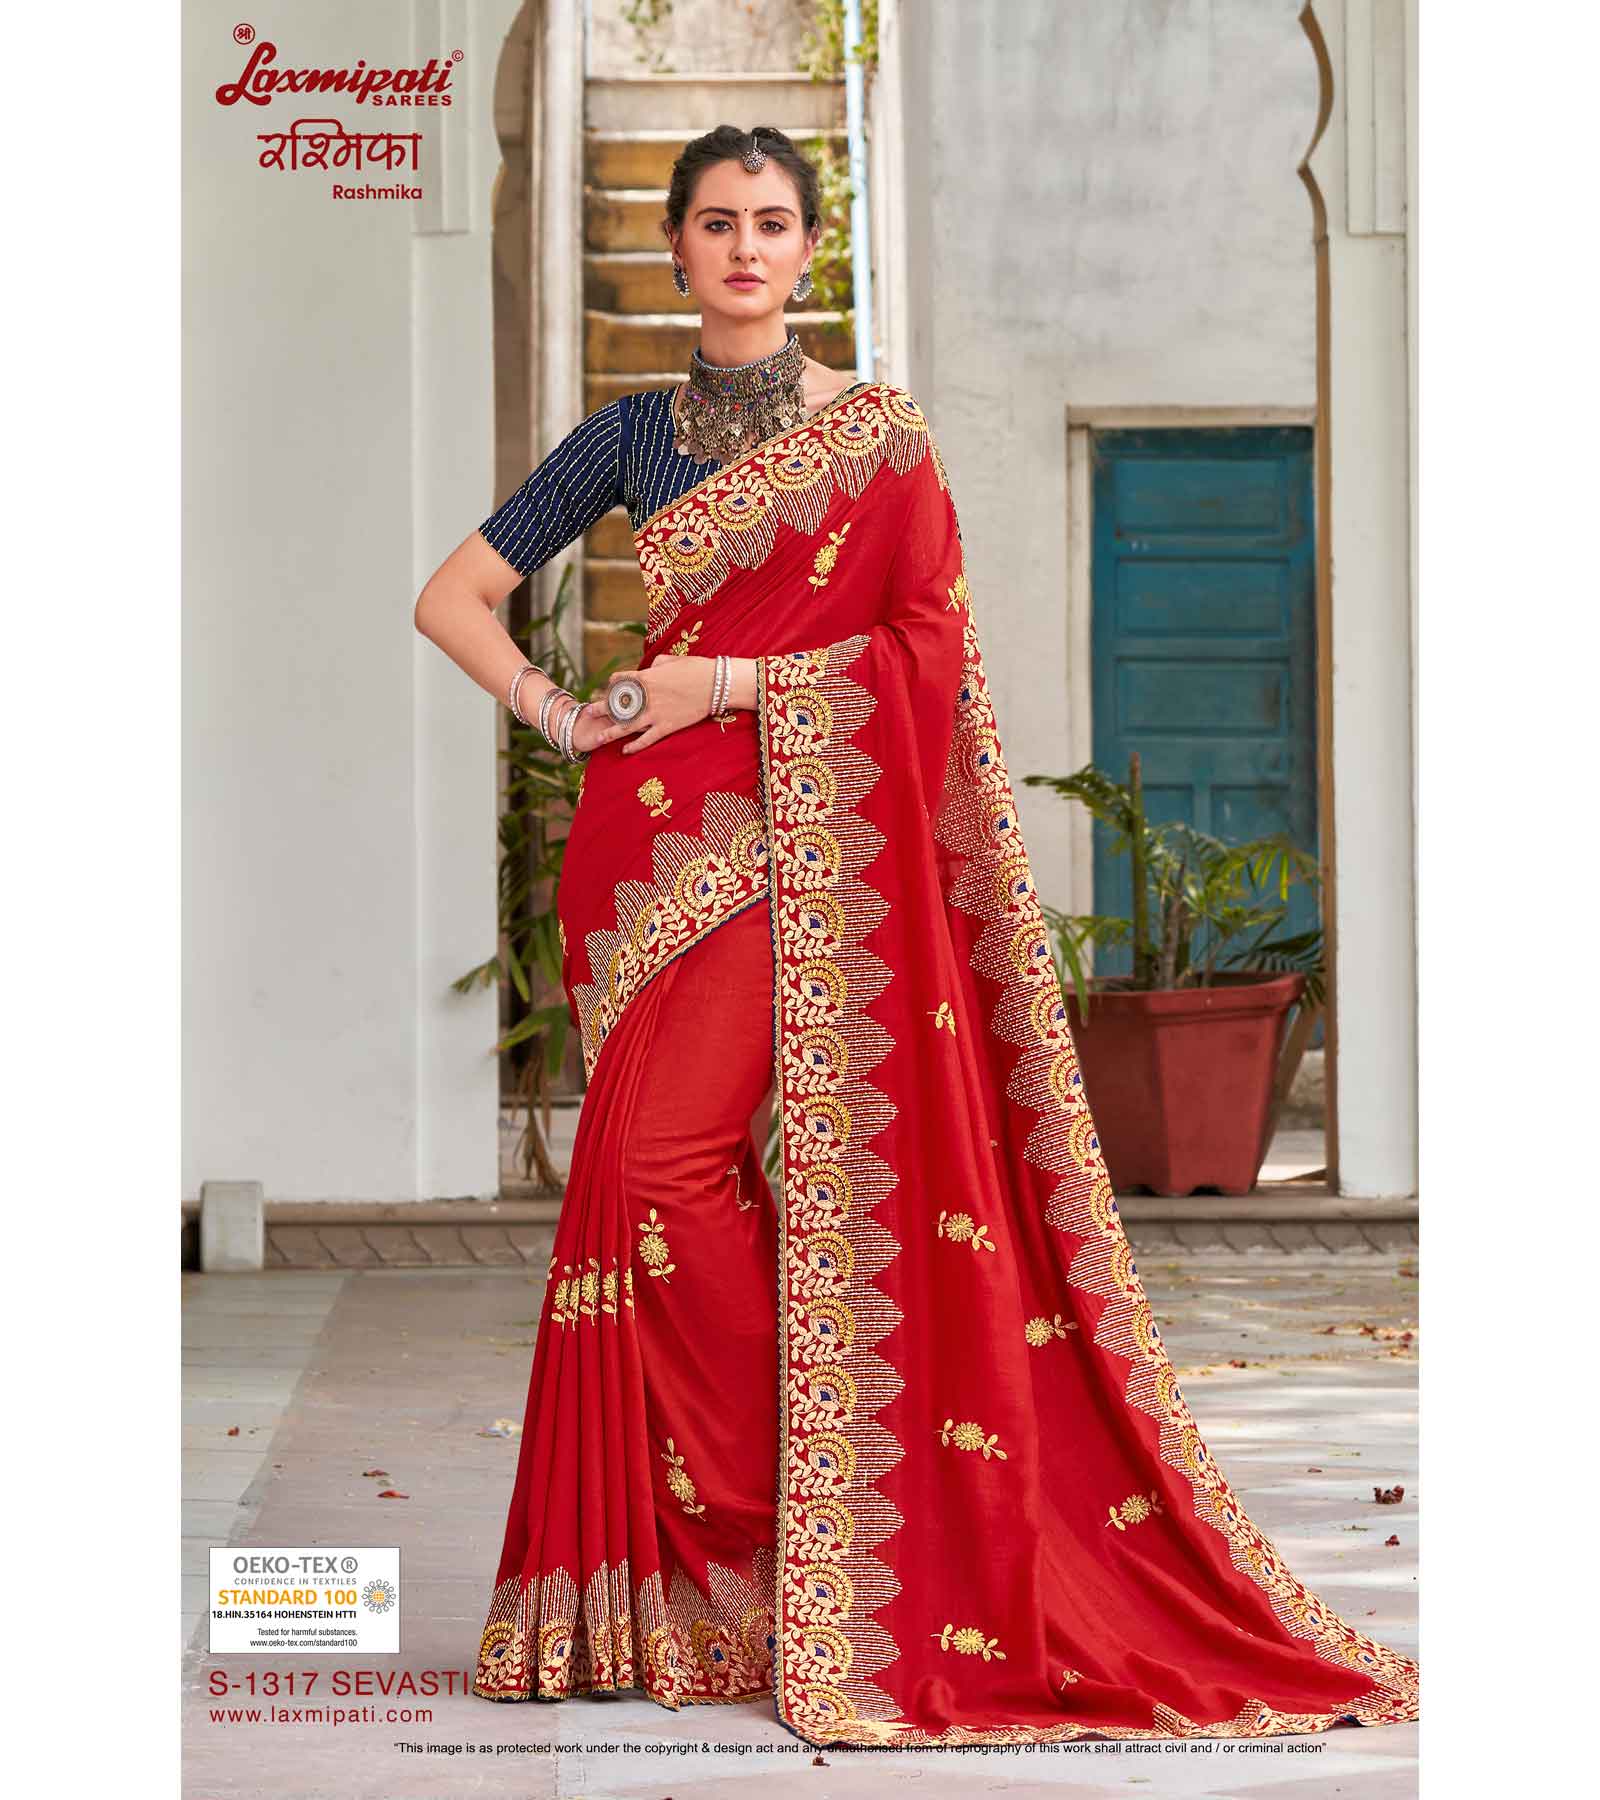 RAJGHARANA's Laxmipati Designer Saree | Colour: Yellow &red | Materail :  Jorget : Amazon.in: Clothing & Accessories